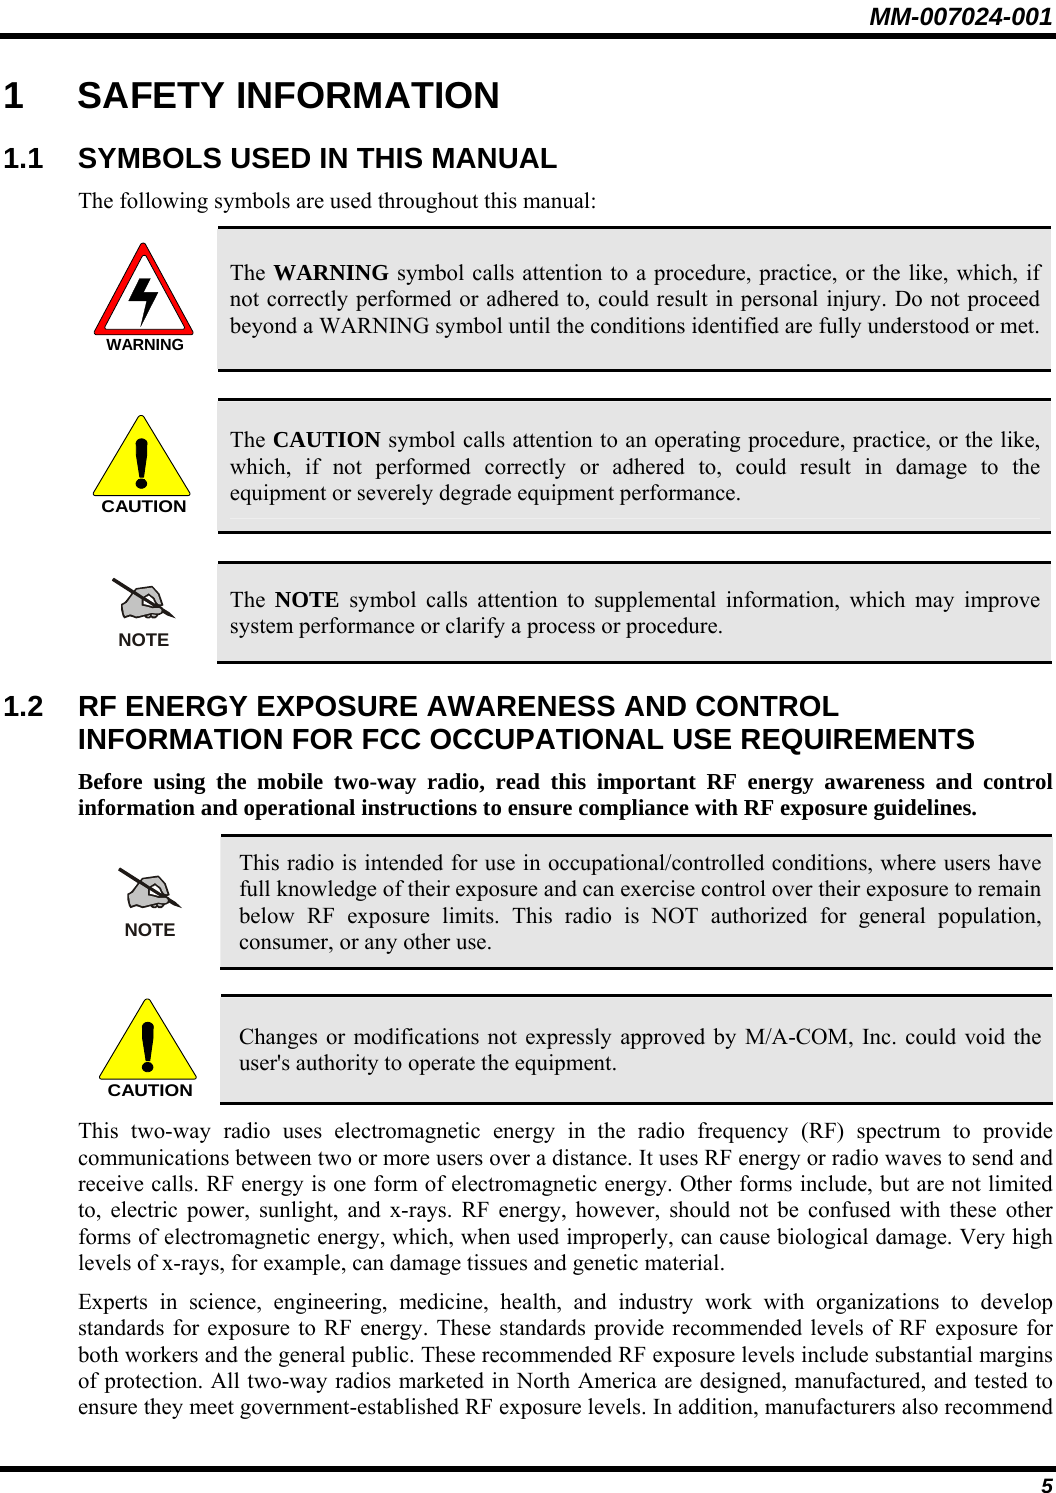 MM-007024-001 5 1 SAFETY INFORMATION 1.1  SYMBOLS USED IN THIS MANUAL The following symbols are used throughout this manual: WARNING The WARNING symbol calls attention to a procedure, practice, or the like, which, if not correctly performed or adhered to, could result in personal injury. Do not proceed beyond a WARNING symbol until the conditions identified are fully understood or met.   CAUTION The CAUTION symbol calls attention to an operating procedure, practice, or the like, which, if not performed correctly or adhered to, could result in damage to the equipment or severely degrade equipment performance.   NOTE The  NOTE symbol calls attention to supplemental information, which may improve system performance or clarify a process or procedure. 1.2  RF ENERGY EXPOSURE AWARENESS AND CONTROL INFORMATION FOR FCC OCCUPATIONAL USE REQUIREMENTS Before using the mobile two-way radio, read this important RF energy awareness and control information and operational instructions to ensure compliance with RF exposure guidelines. NOTE This radio is intended for use in occupational/controlled conditions, where users have full knowledge of their exposure and can exercise control over their exposure to remain below RF exposure limits. This radio is NOT authorized for general population, consumer, or any other use.  CAUTION Changes or modifications not expressly approved by M/A-COM, Inc. could void the user&apos;s authority to operate the equipment. This two-way radio uses electromagnetic energy in the radio frequency (RF) spectrum to provide communications between two or more users over a distance. It uses RF energy or radio waves to send and receive calls. RF energy is one form of electromagnetic energy. Other forms include, but are not limited to, electric power, sunlight, and x-rays. RF energy, however, should not be confused with these other forms of electromagnetic energy, which, when used improperly, can cause biological damage. Very high levels of x-rays, for example, can damage tissues and genetic material. Experts in science, engineering, medicine, health, and industry work with organizations to develop standards for exposure to RF energy. These standards provide recommended levels of RF exposure for both workers and the general public. These recommended RF exposure levels include substantial margins of protection. All two-way radios marketed in North America are designed, manufactured, and tested to ensure they meet government-established RF exposure levels. In addition, manufacturers also recommend 